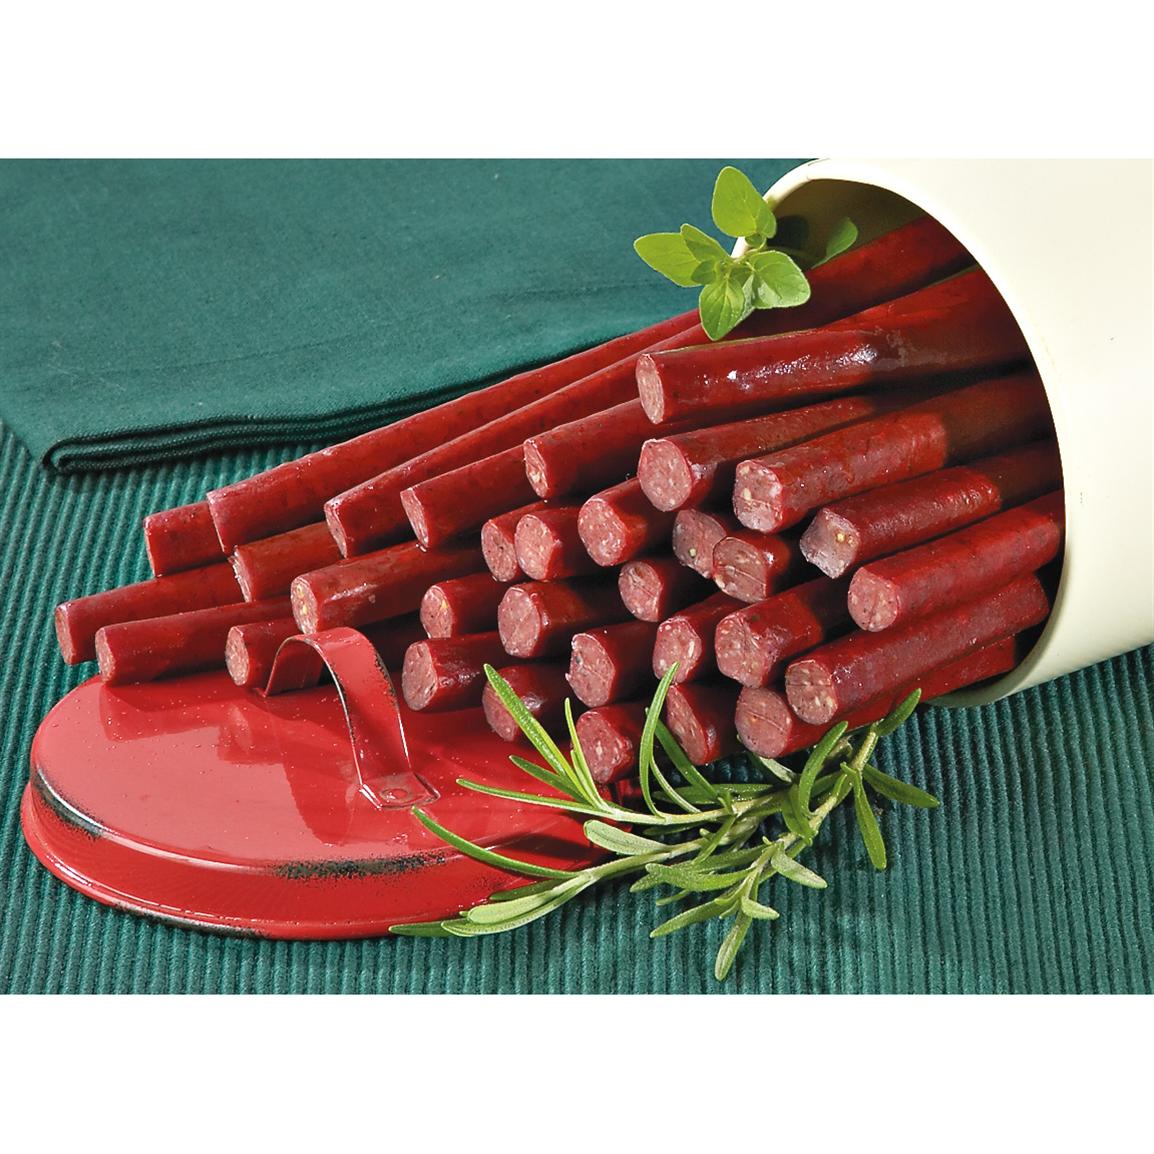 2 lbs. Hunters Reserve Meat Sticks 147185, Food Gifts at